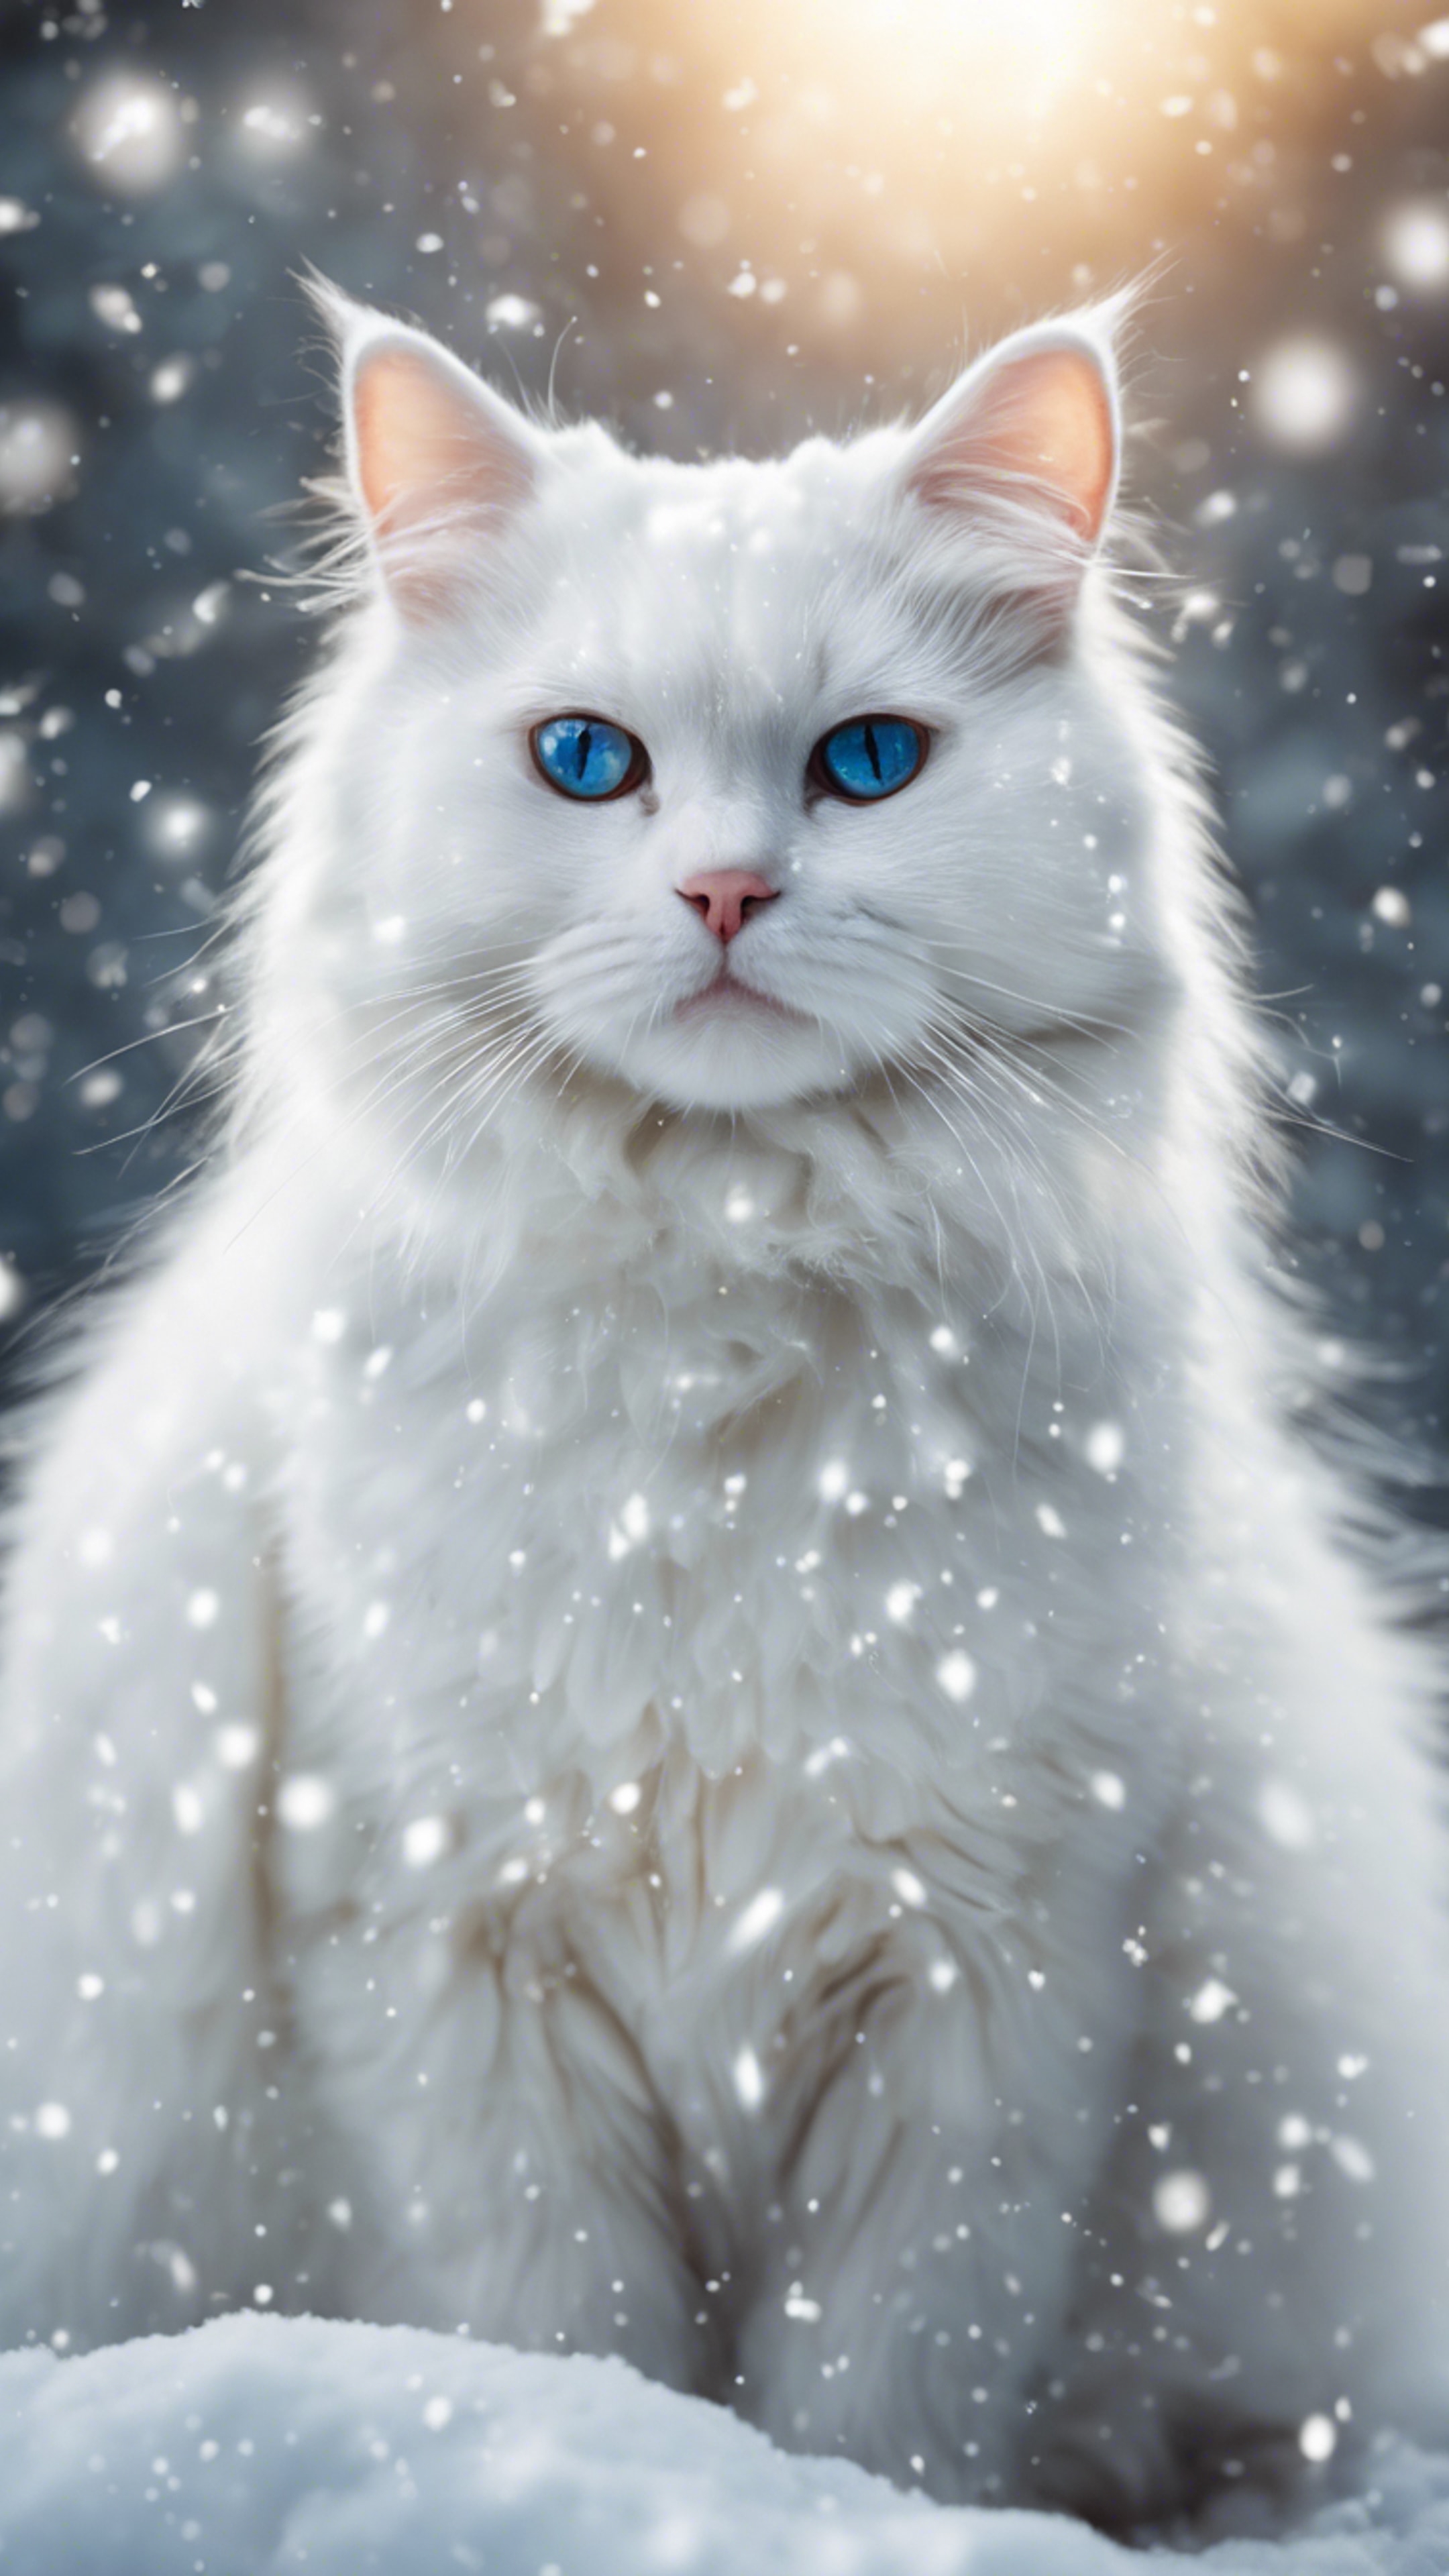 A fluffy white cat in the winter, amidst falling snowflakes. Hintergrund[a246cb8c0cd2485b96c3]